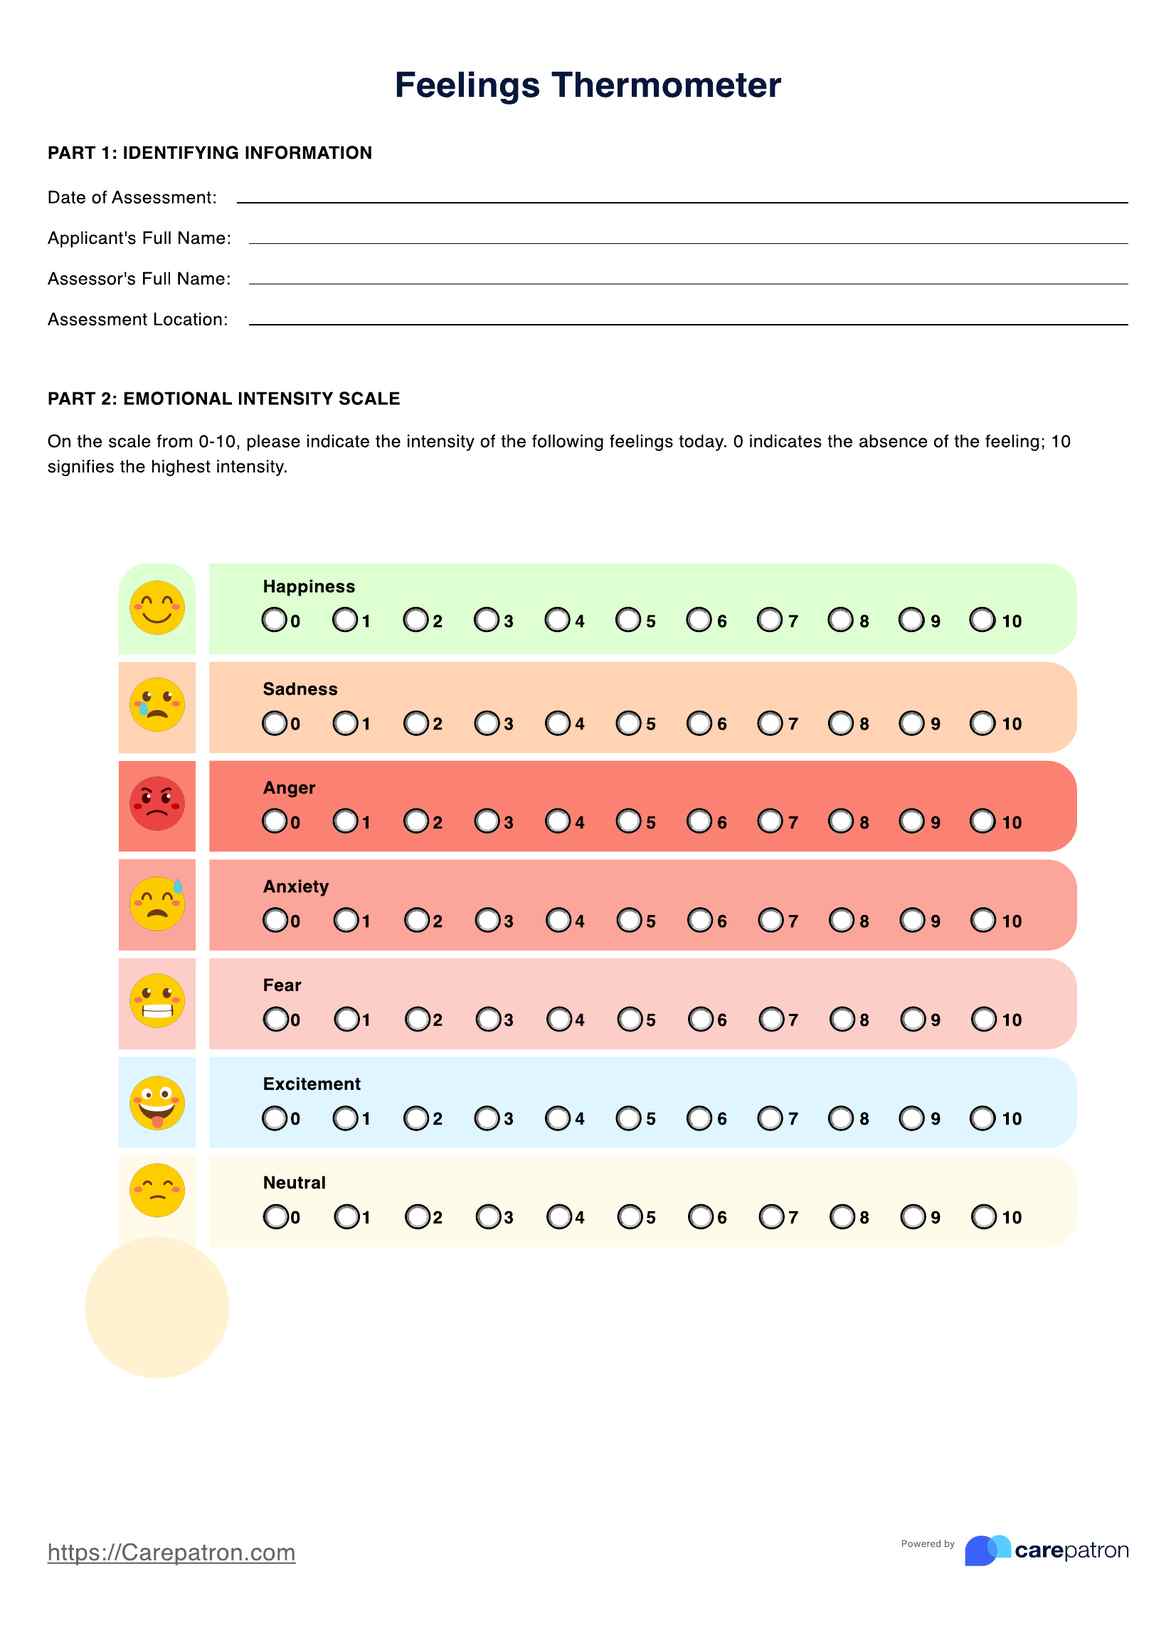 Feelings Thermometer PDF Example